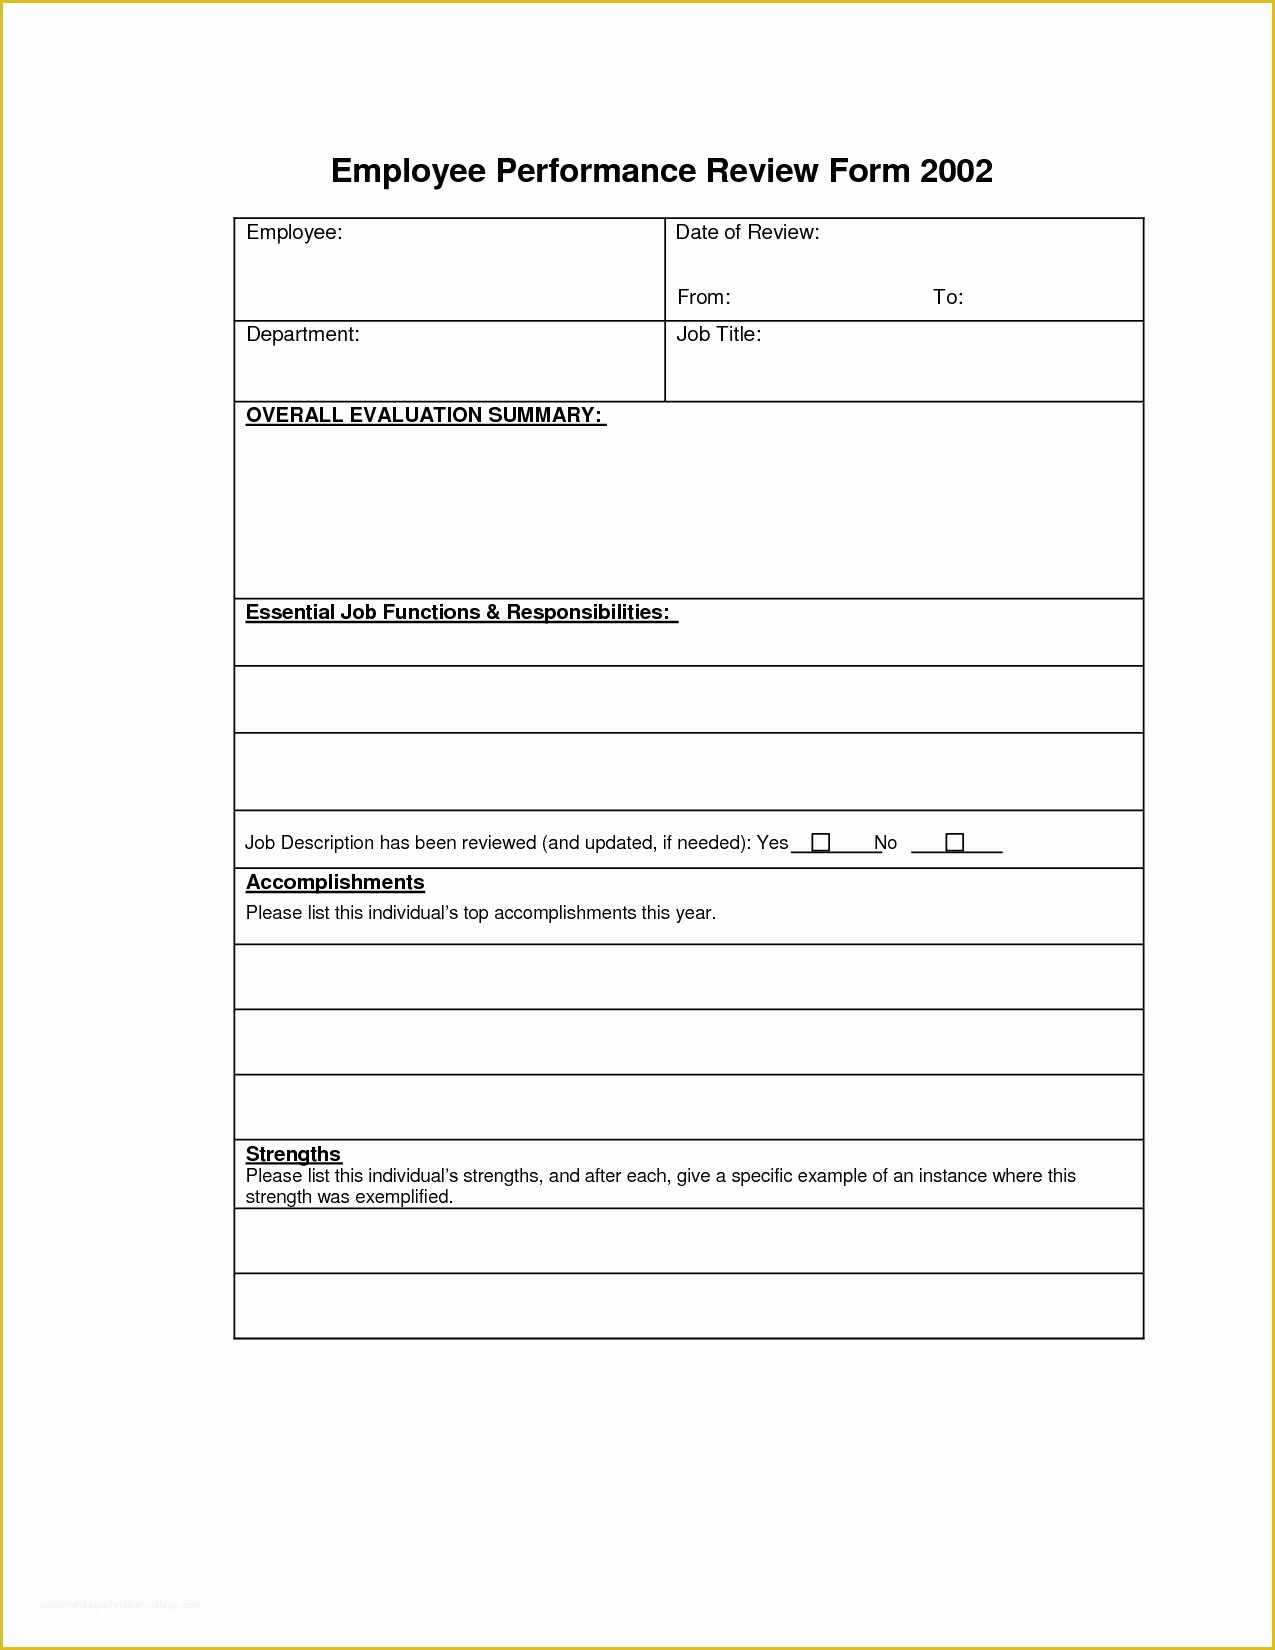 Employee Review form Template Free Of Performance Review Templates Free Portablegasgrillweber